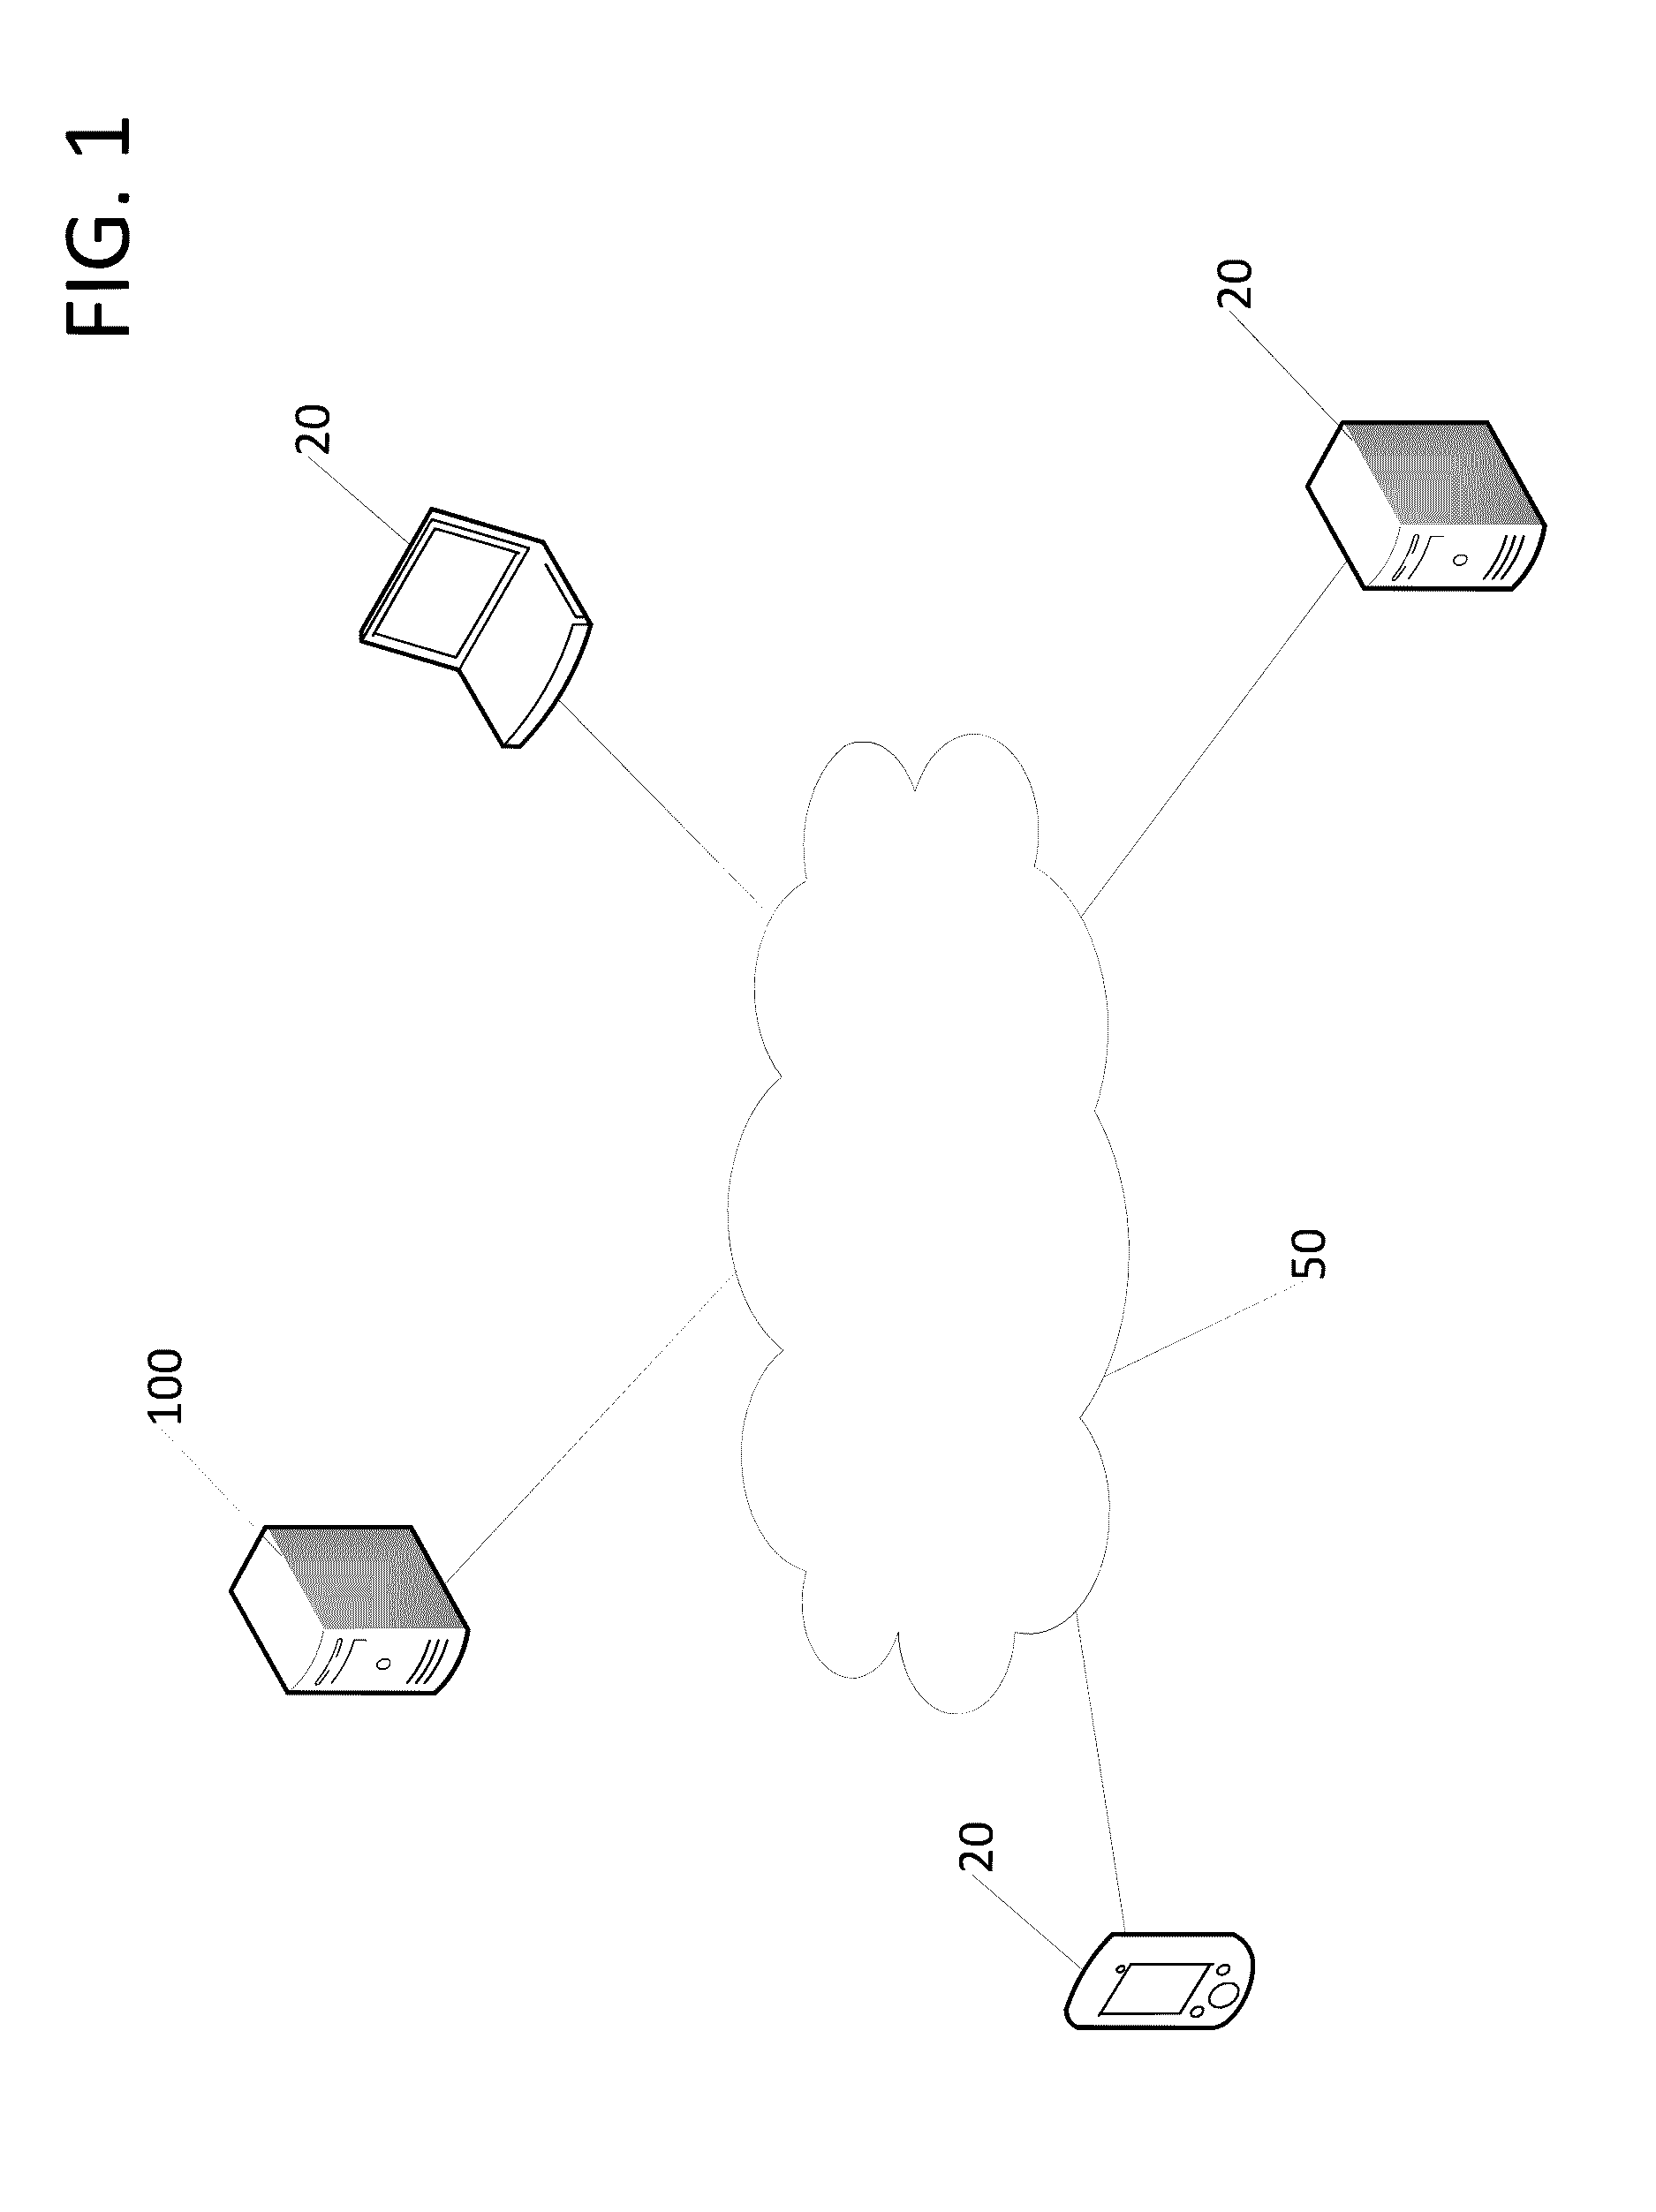 Systems, methods, and computer program products for detecting billing anomalies